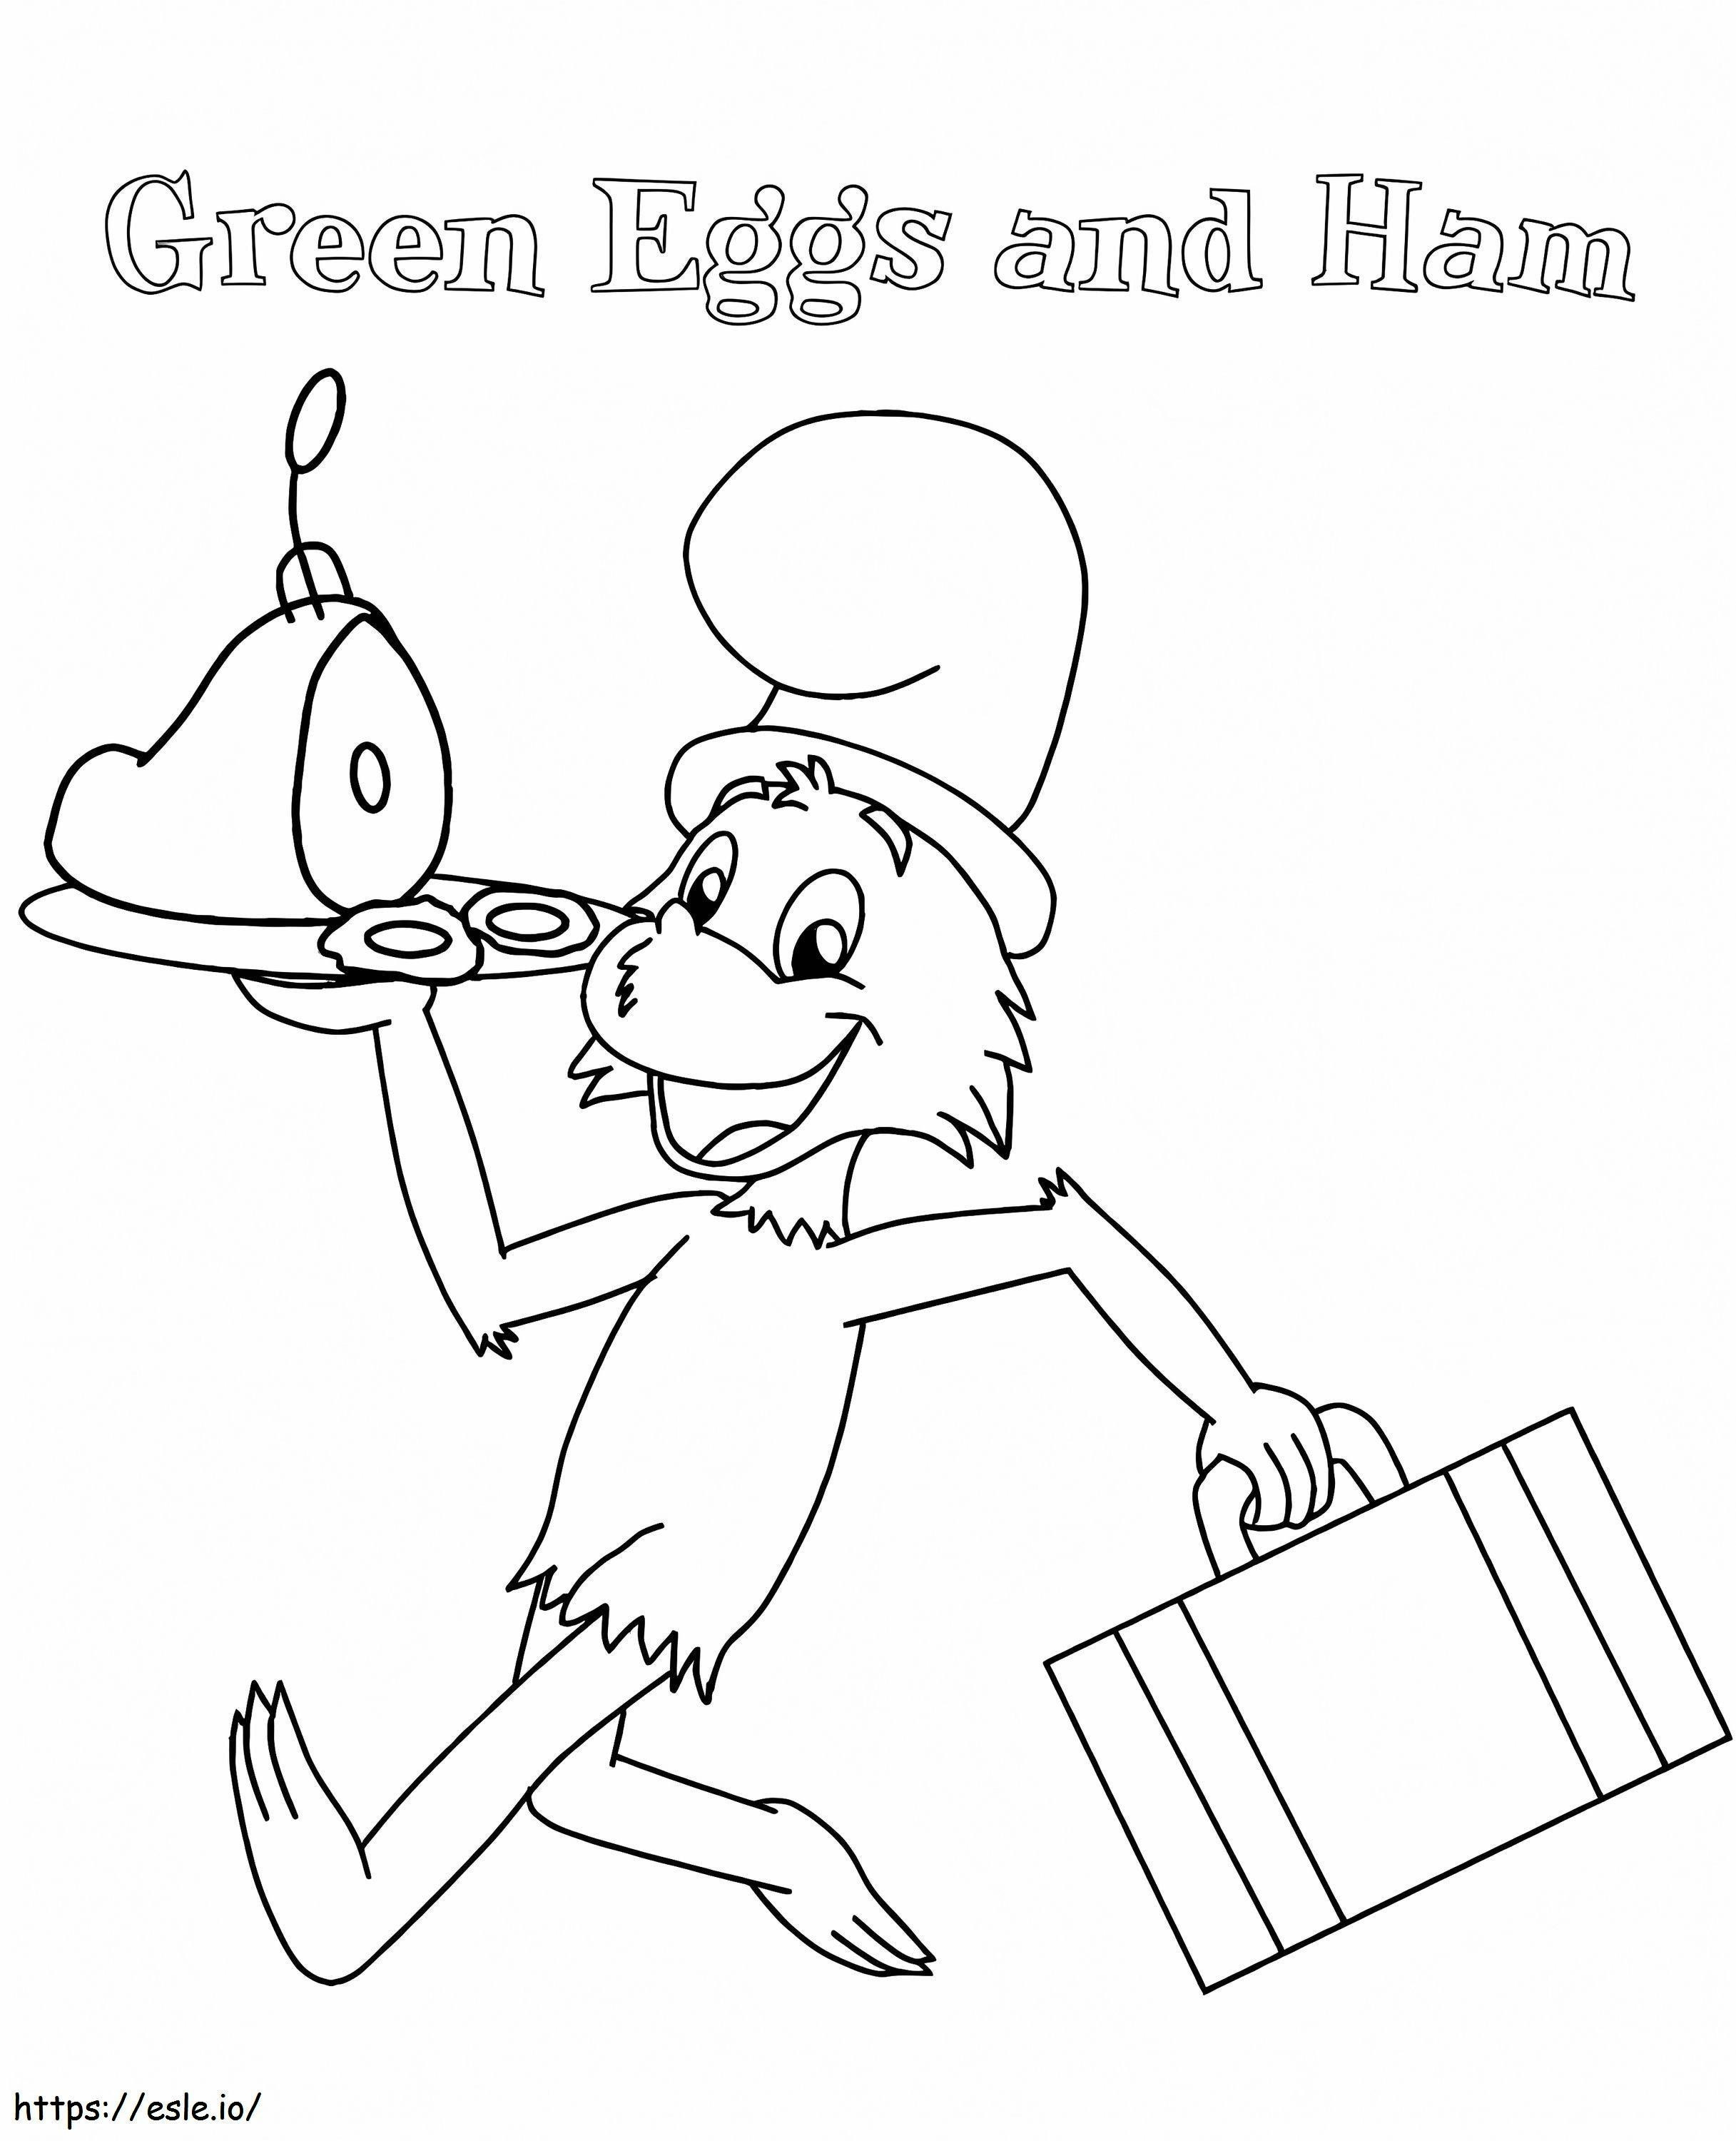 Green Eggs And Ham 19 coloring page